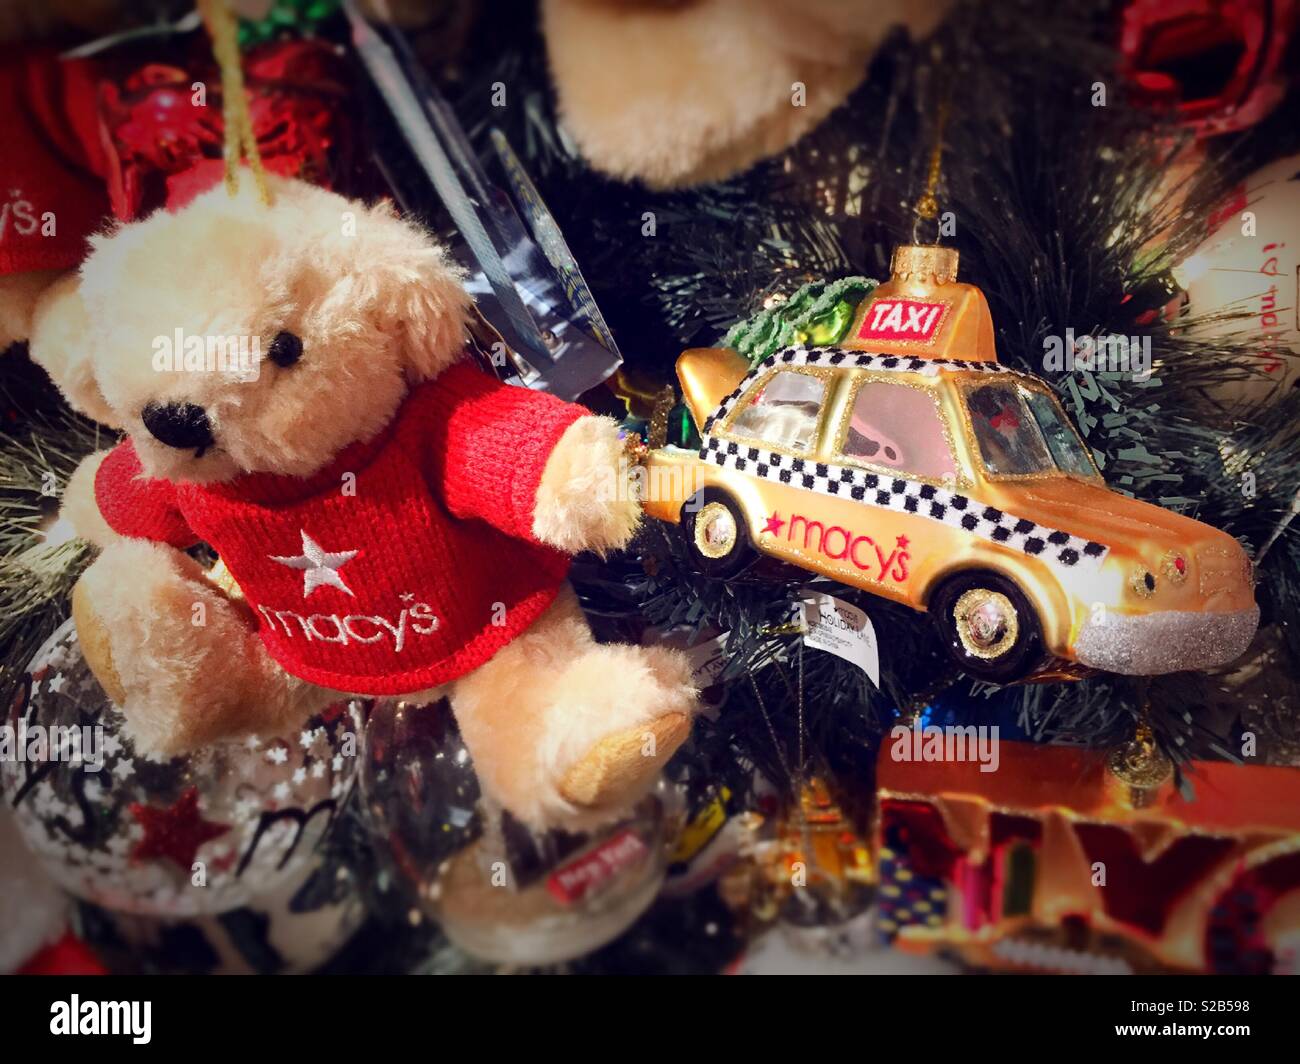 Macy’s holiday Lane featuring teddy bear and NYC taxi cab ornaments hanging from a Christmas tree, NYC, USA Stock Photo